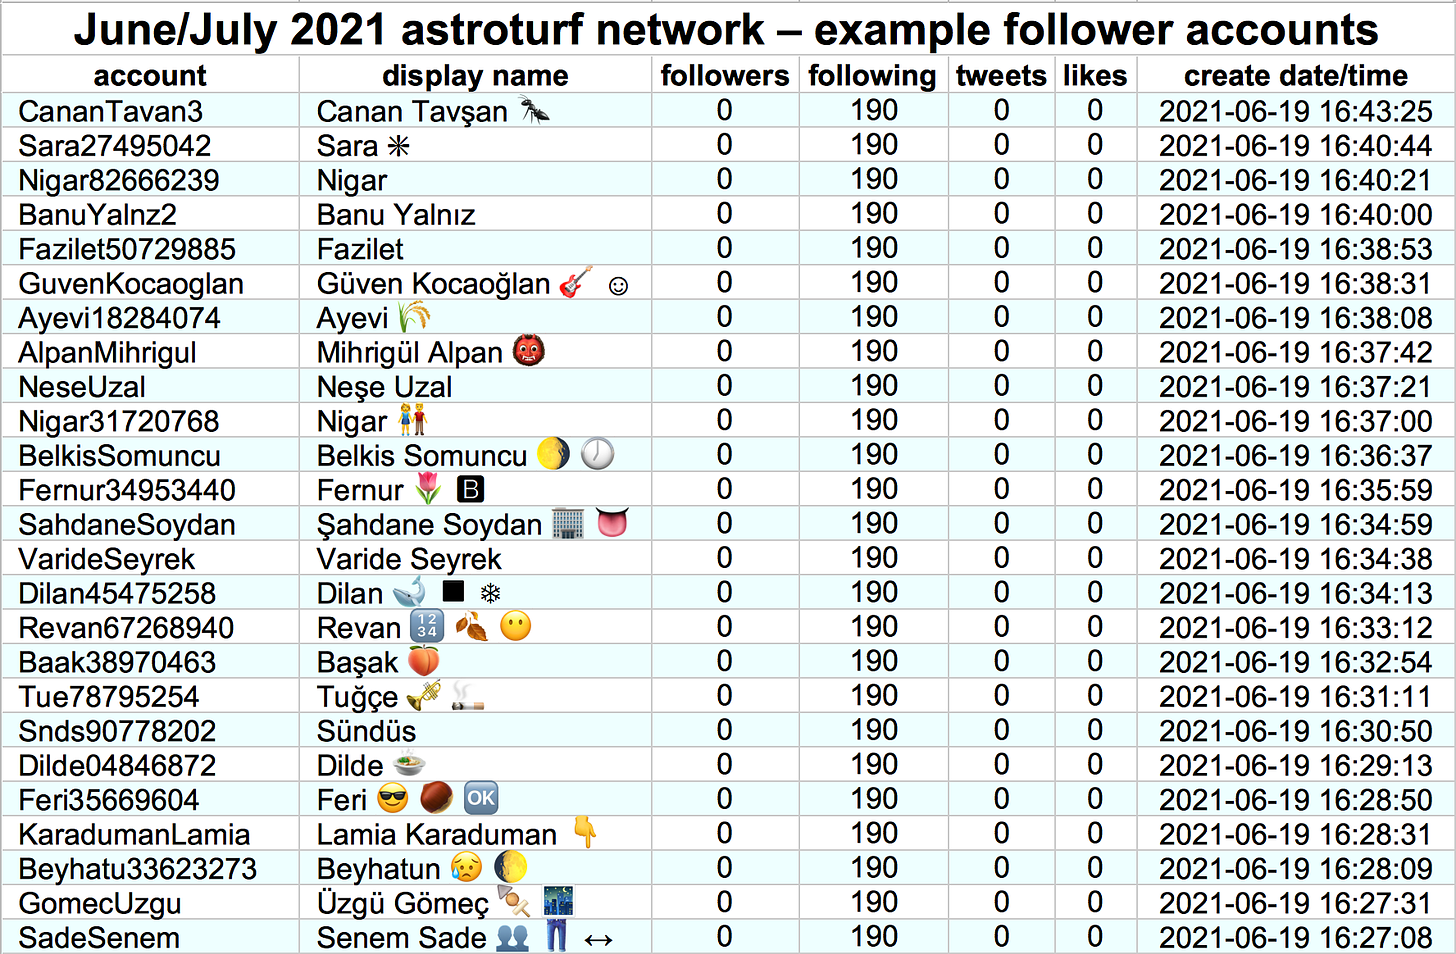 table of example fake followers of the fake blue-check accounts